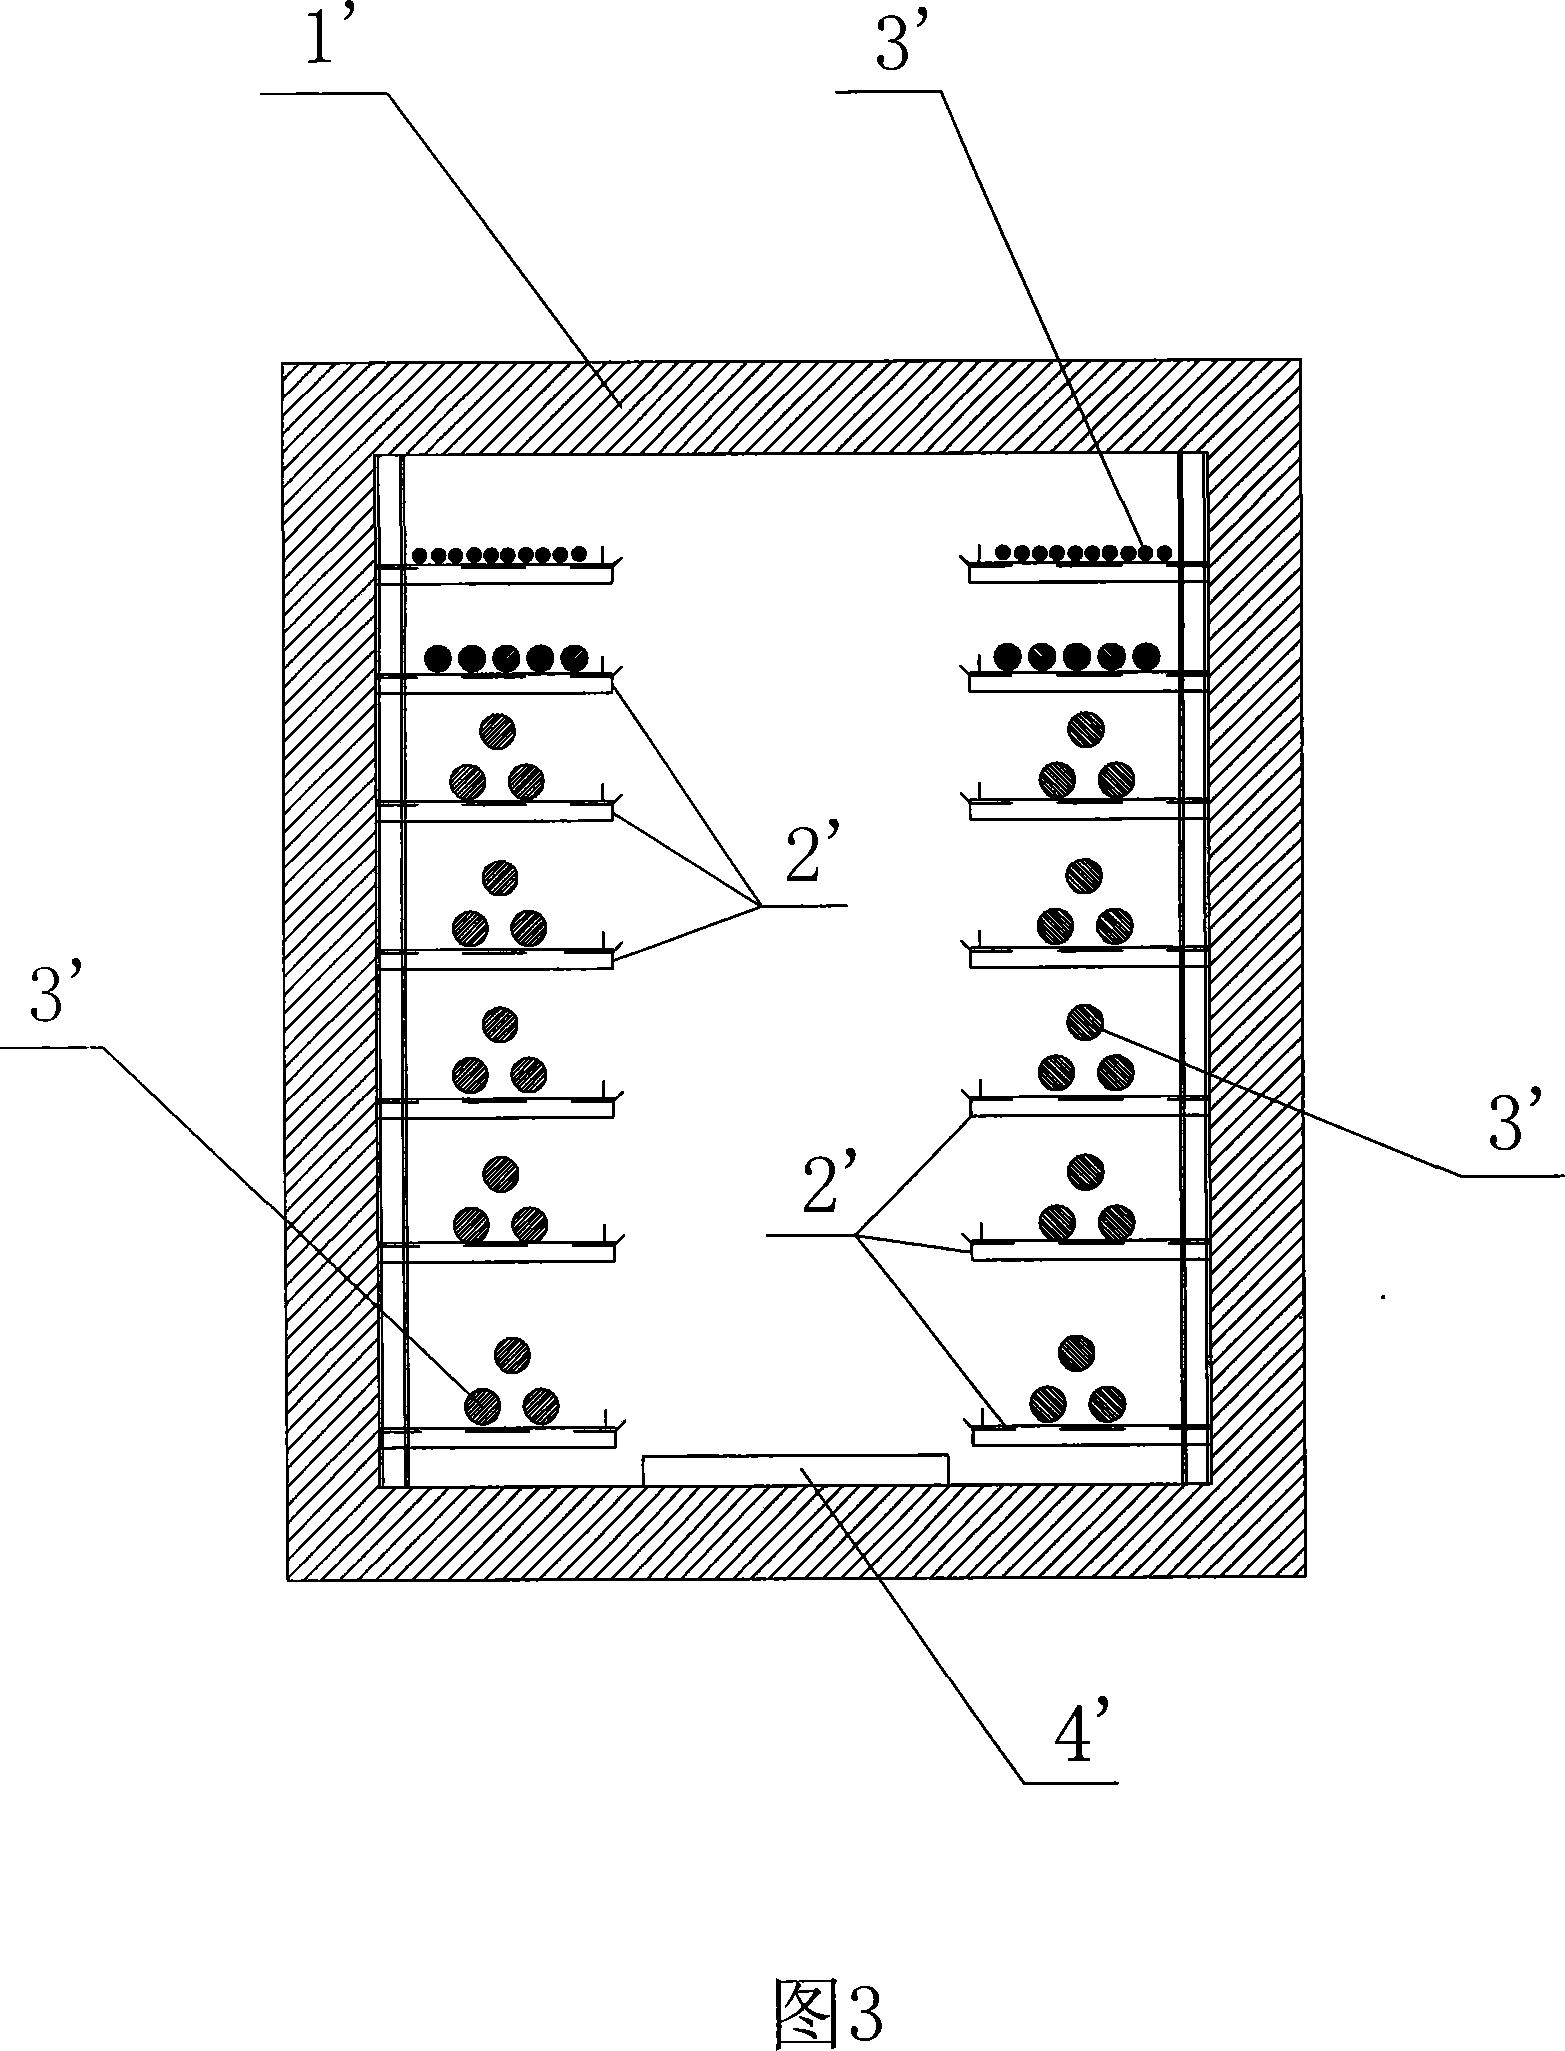 Submerged fire extinguishing nitrogen system for closed space